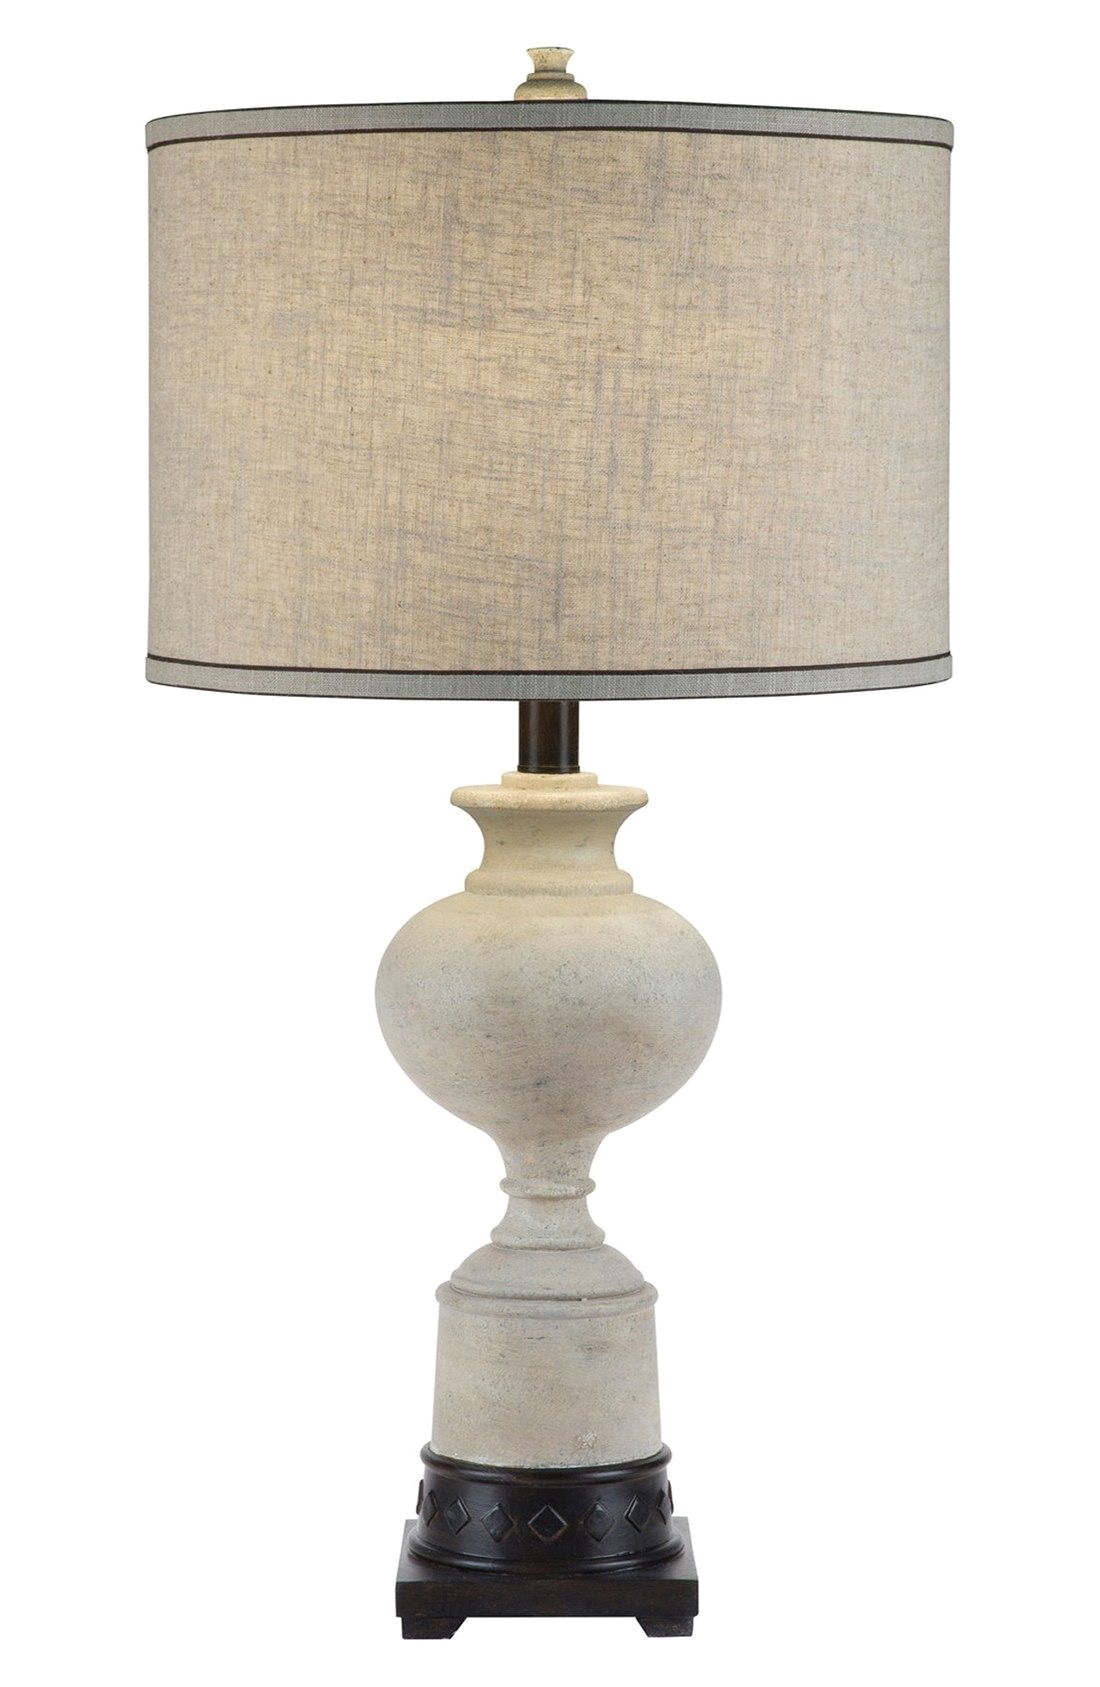 jalexander trophy whitewash table lamp available at nordstrom